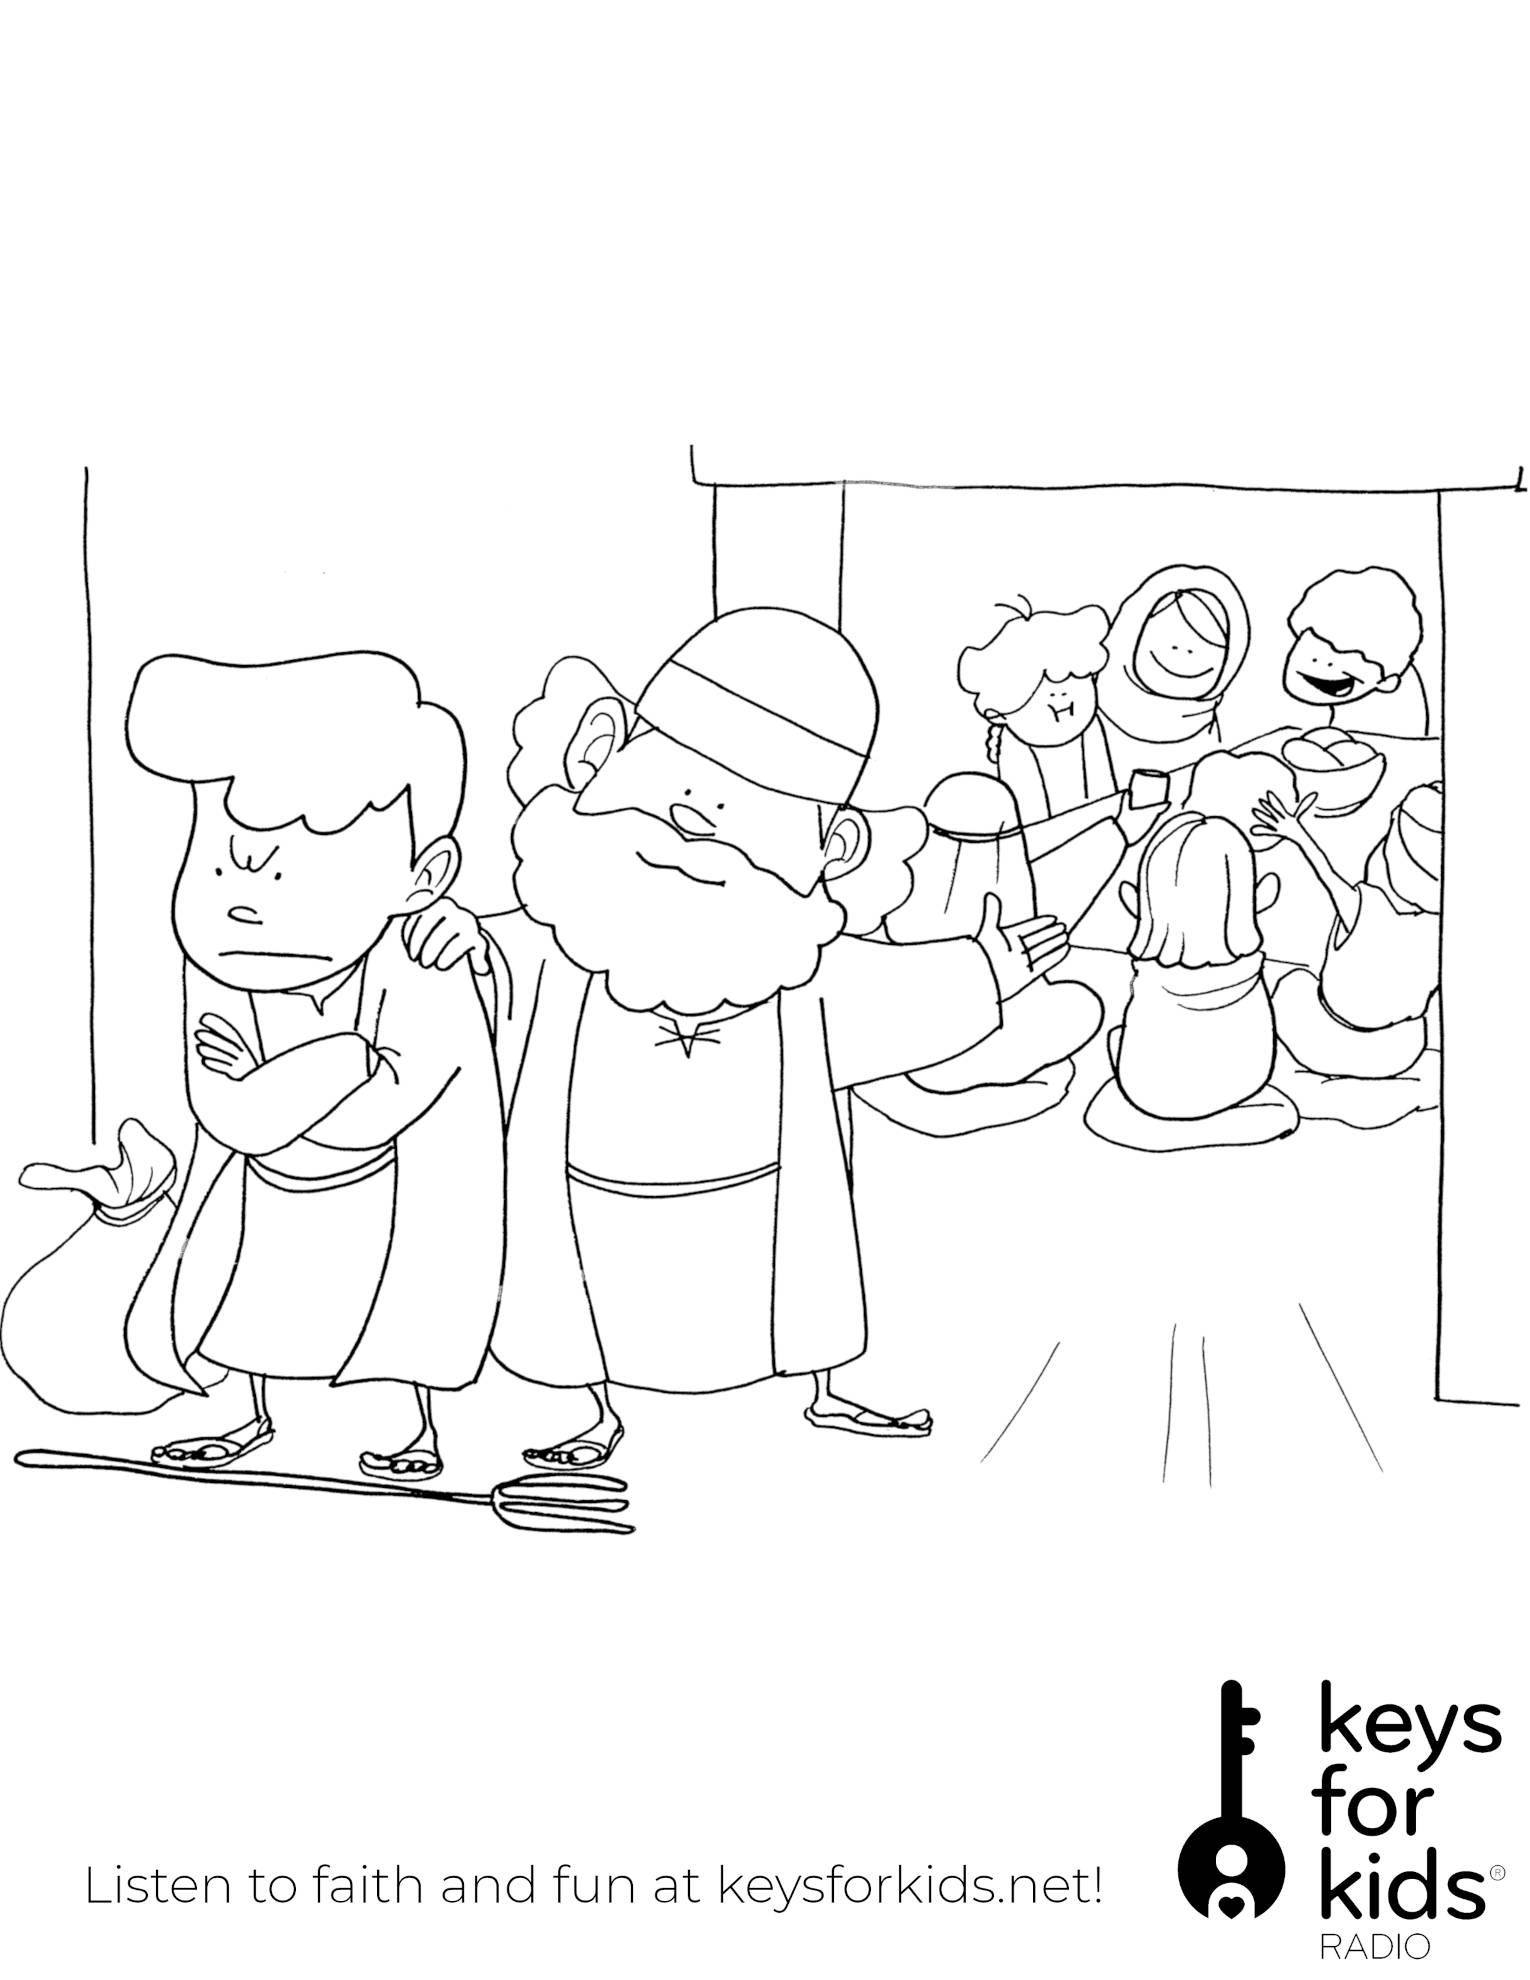 Prodigal Son coloring page